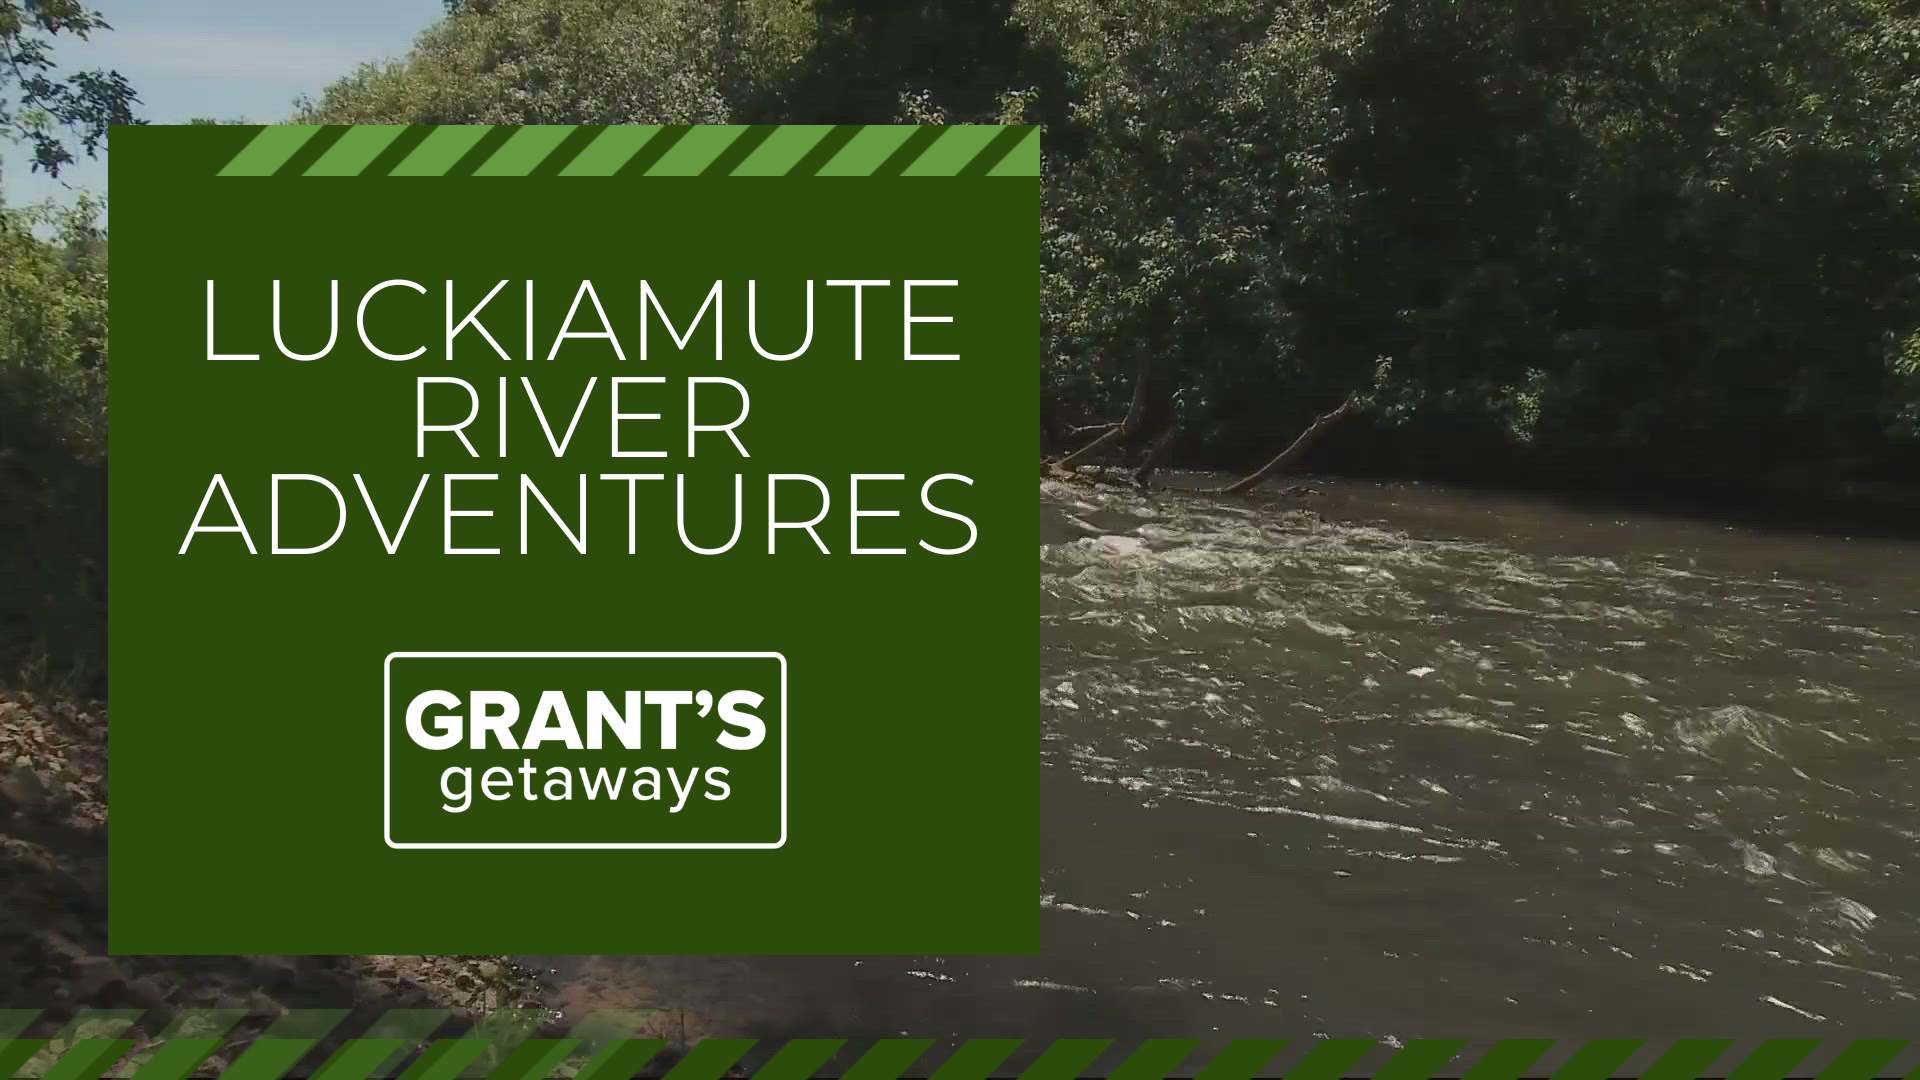 The Luckiamute River is home to mountain bike trails, wonderful waterfalls and a new Oregon State Park. Grant McOmie went on an adventure in Polk County.